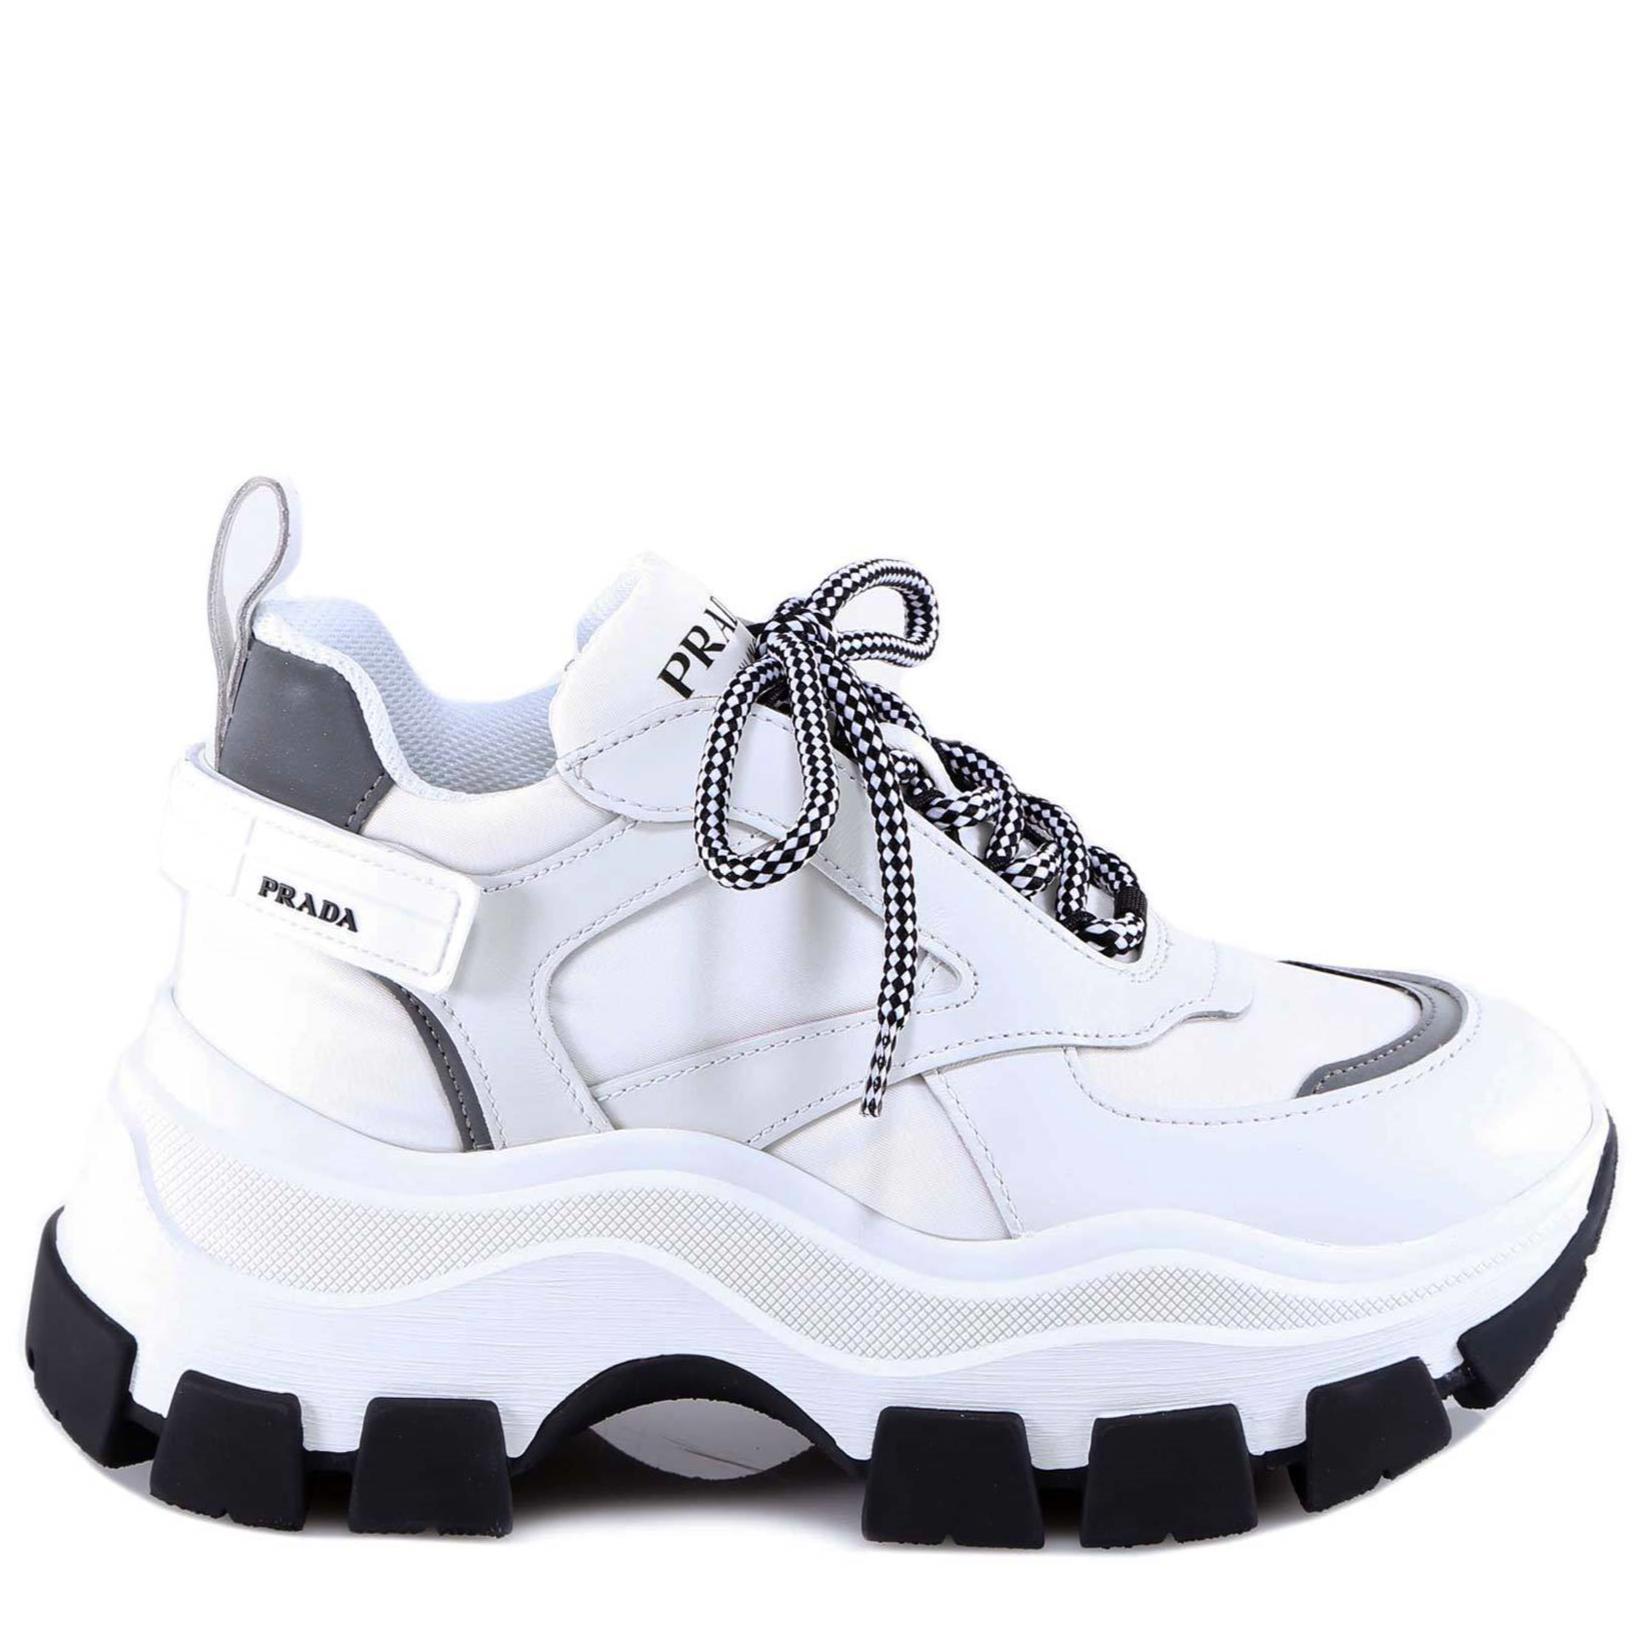 Prada Synthetic Velcro Strap Detail Panelled Sneakers in White - Lyst